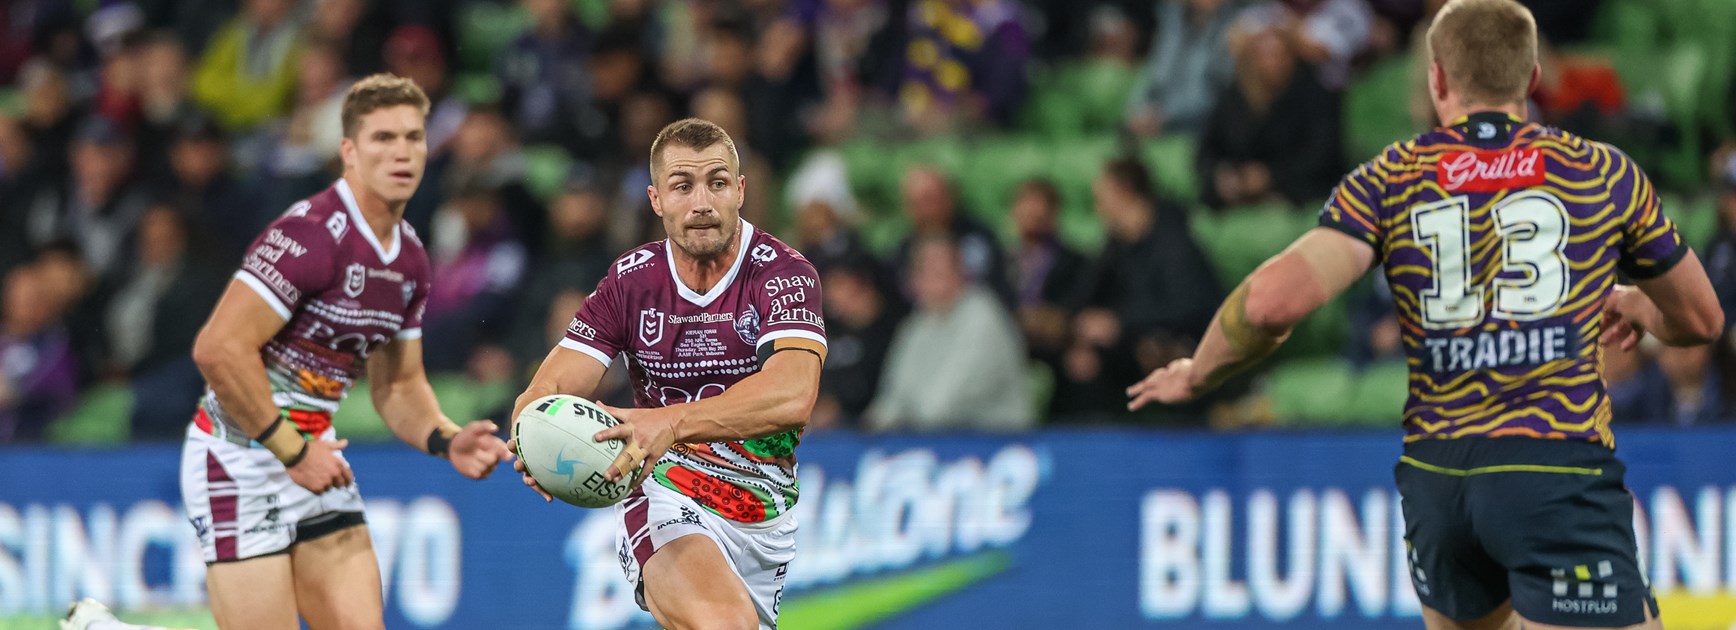 Sea Eagles lose 28-8 to Storm in Indigenous Round